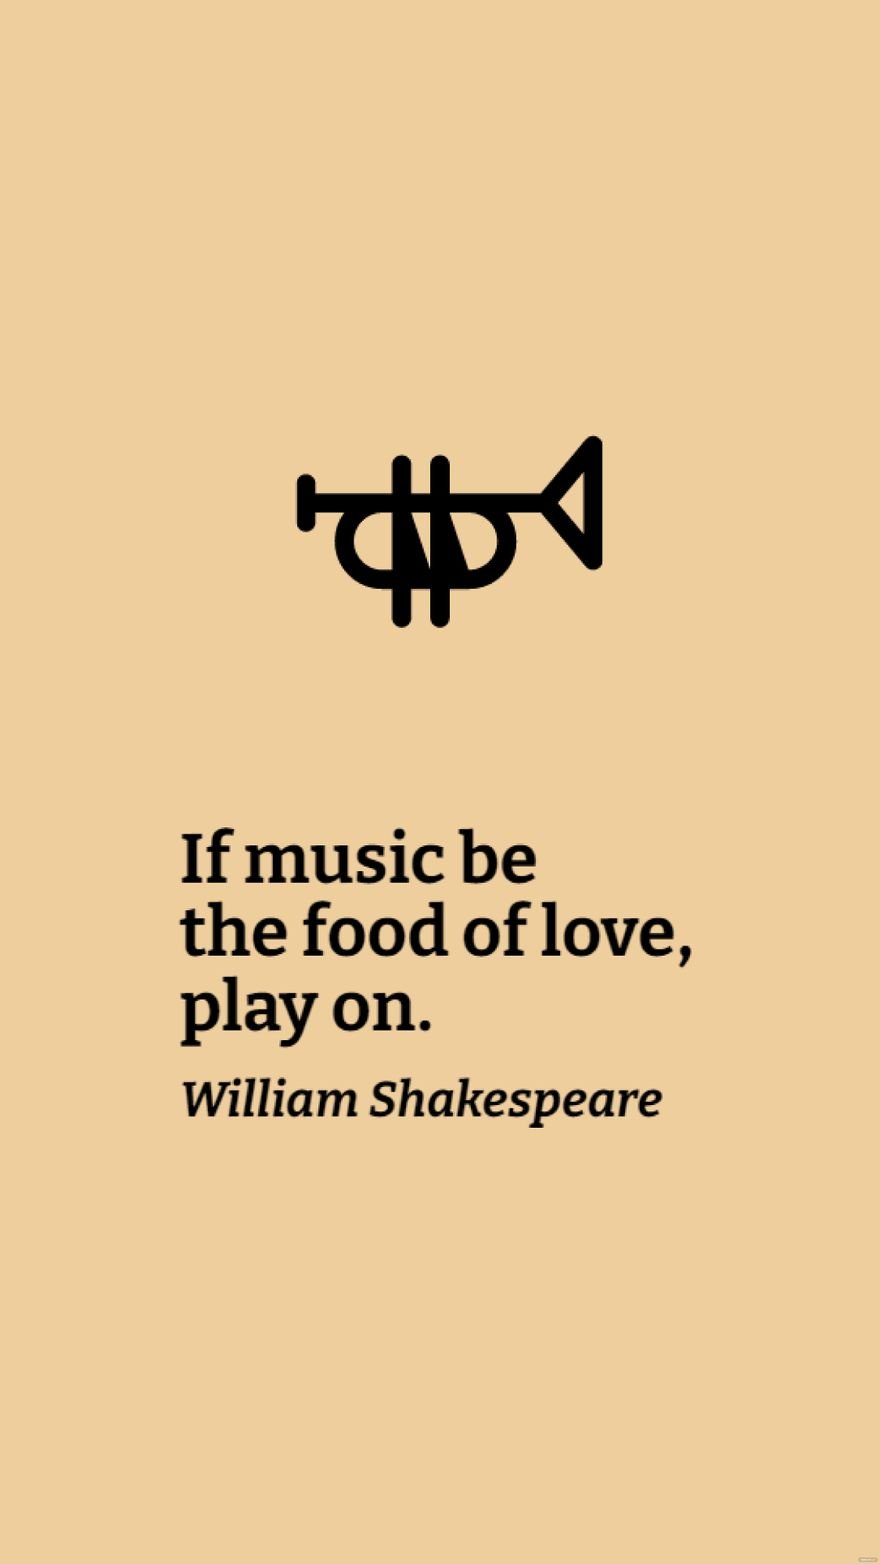 William Shakespeare - If music be the food of love, play on.